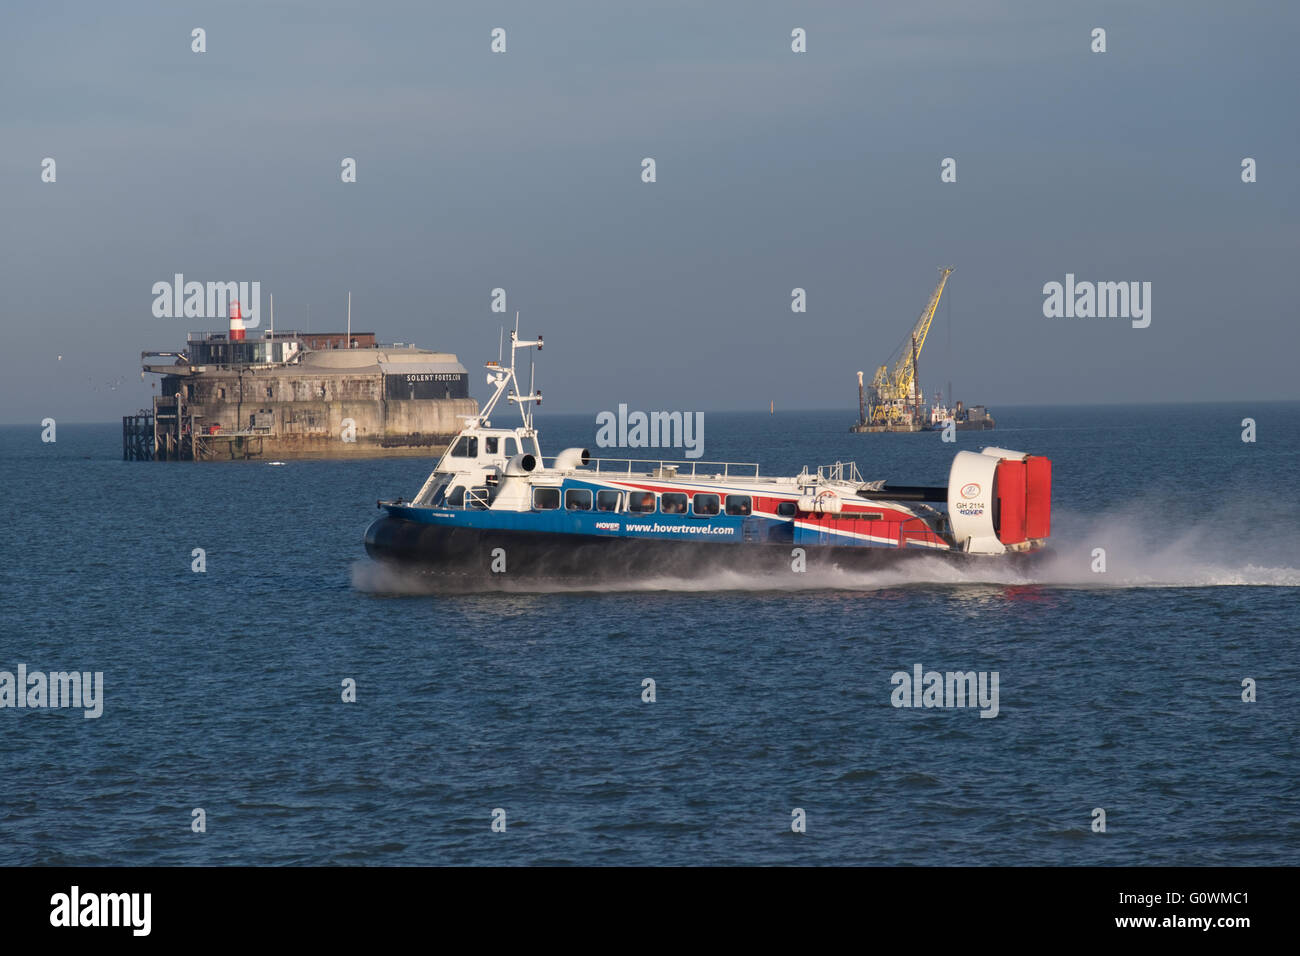 The Hovertravel Hovercraft, Freedom 90, passing Spitbank Fork in the Solent en route to Southsea Stock Photo